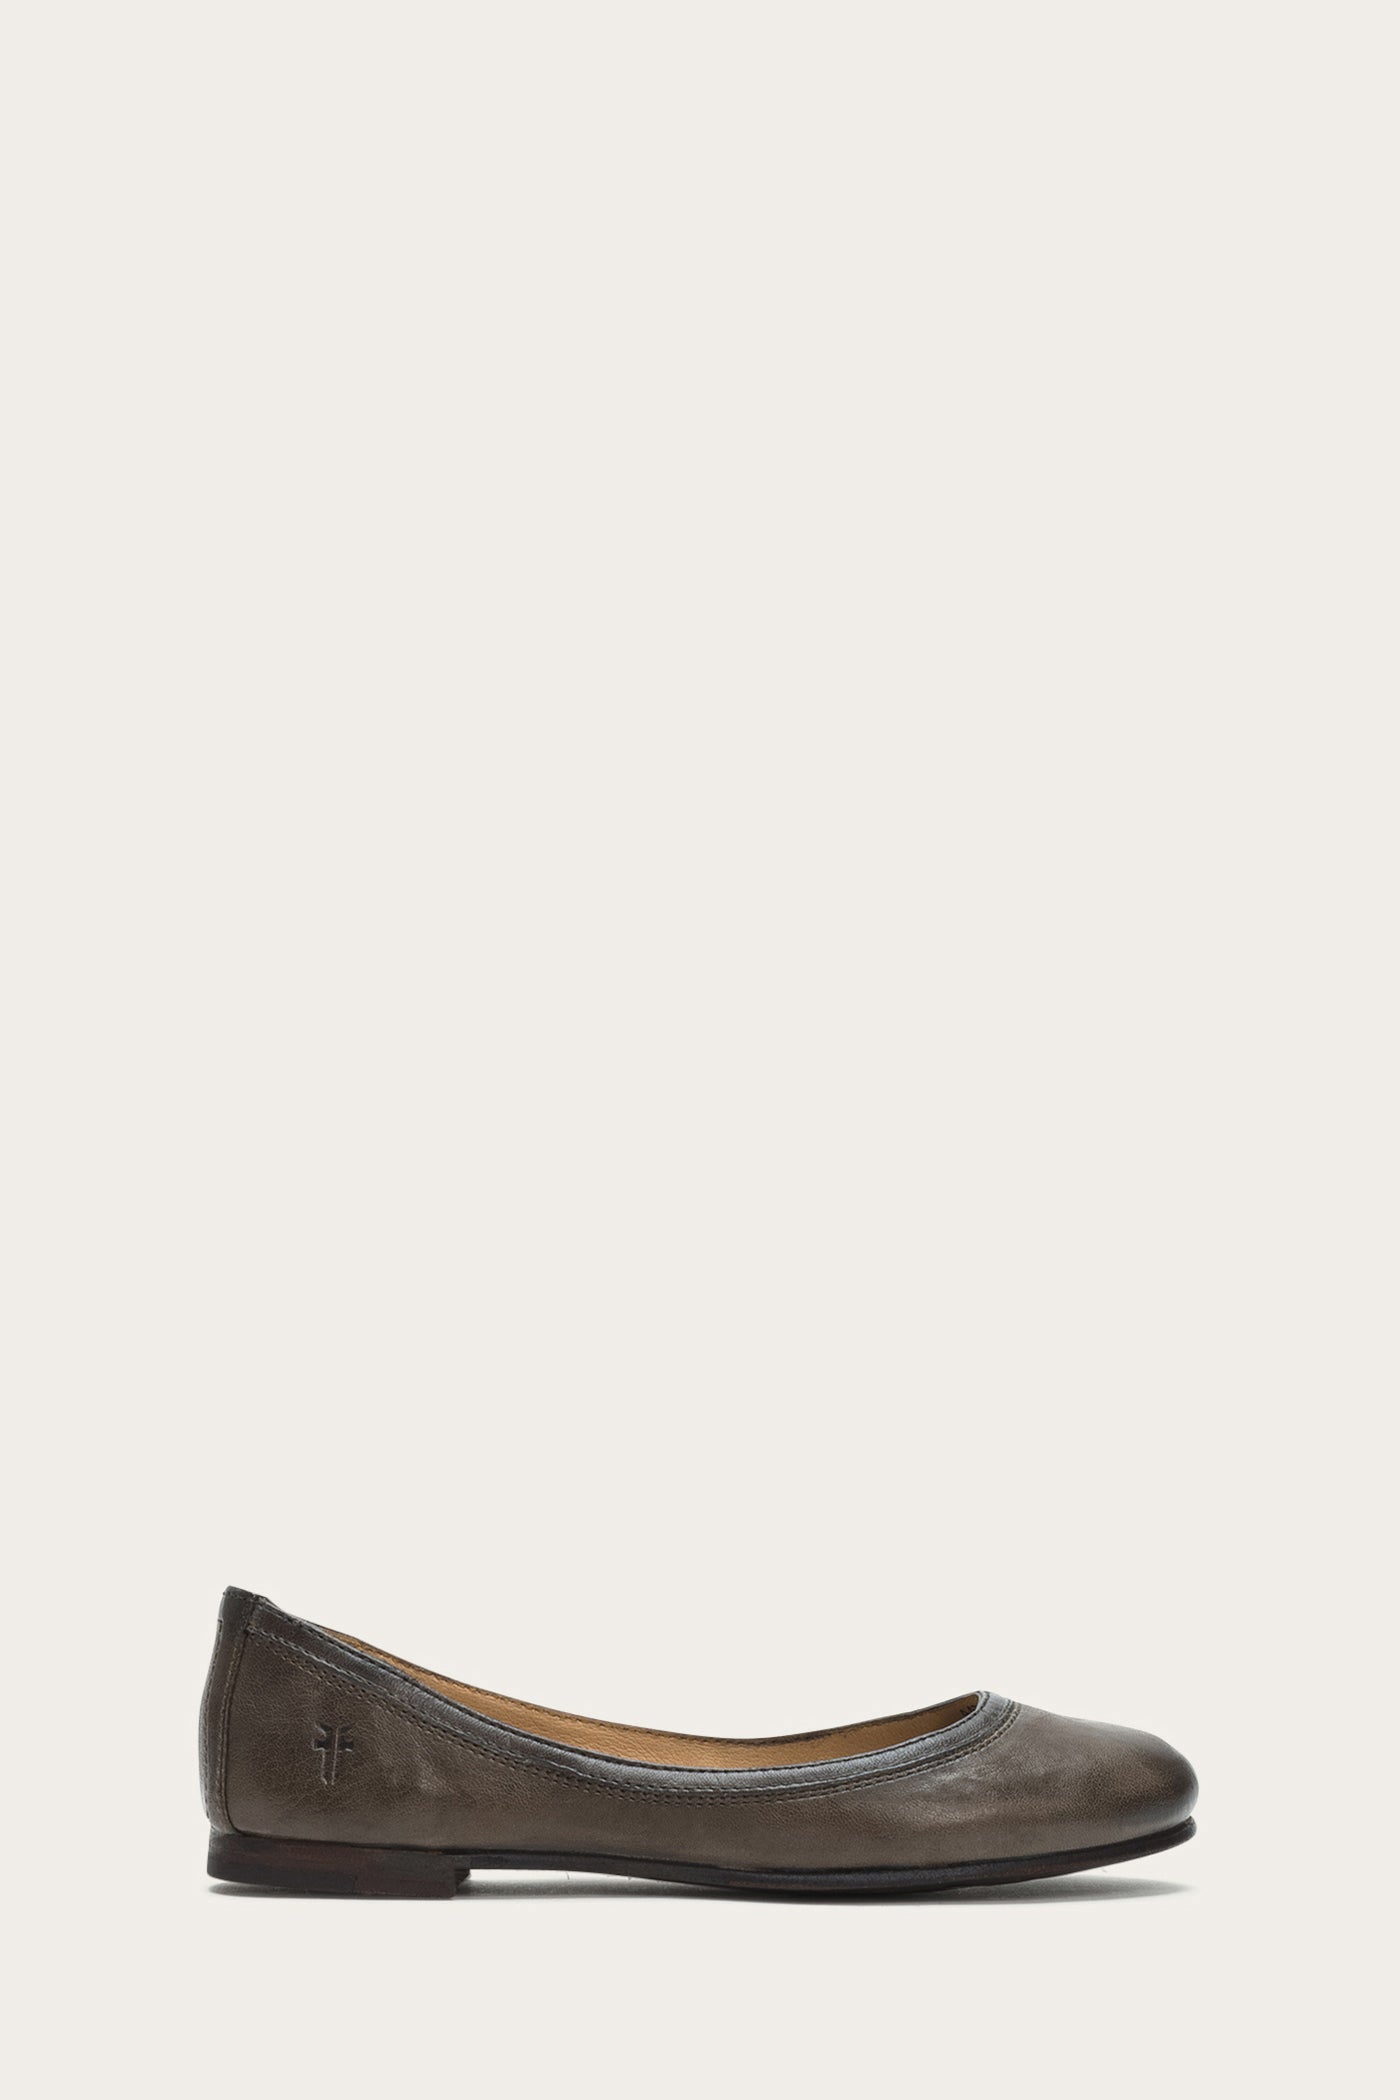 frye pointed toe flats